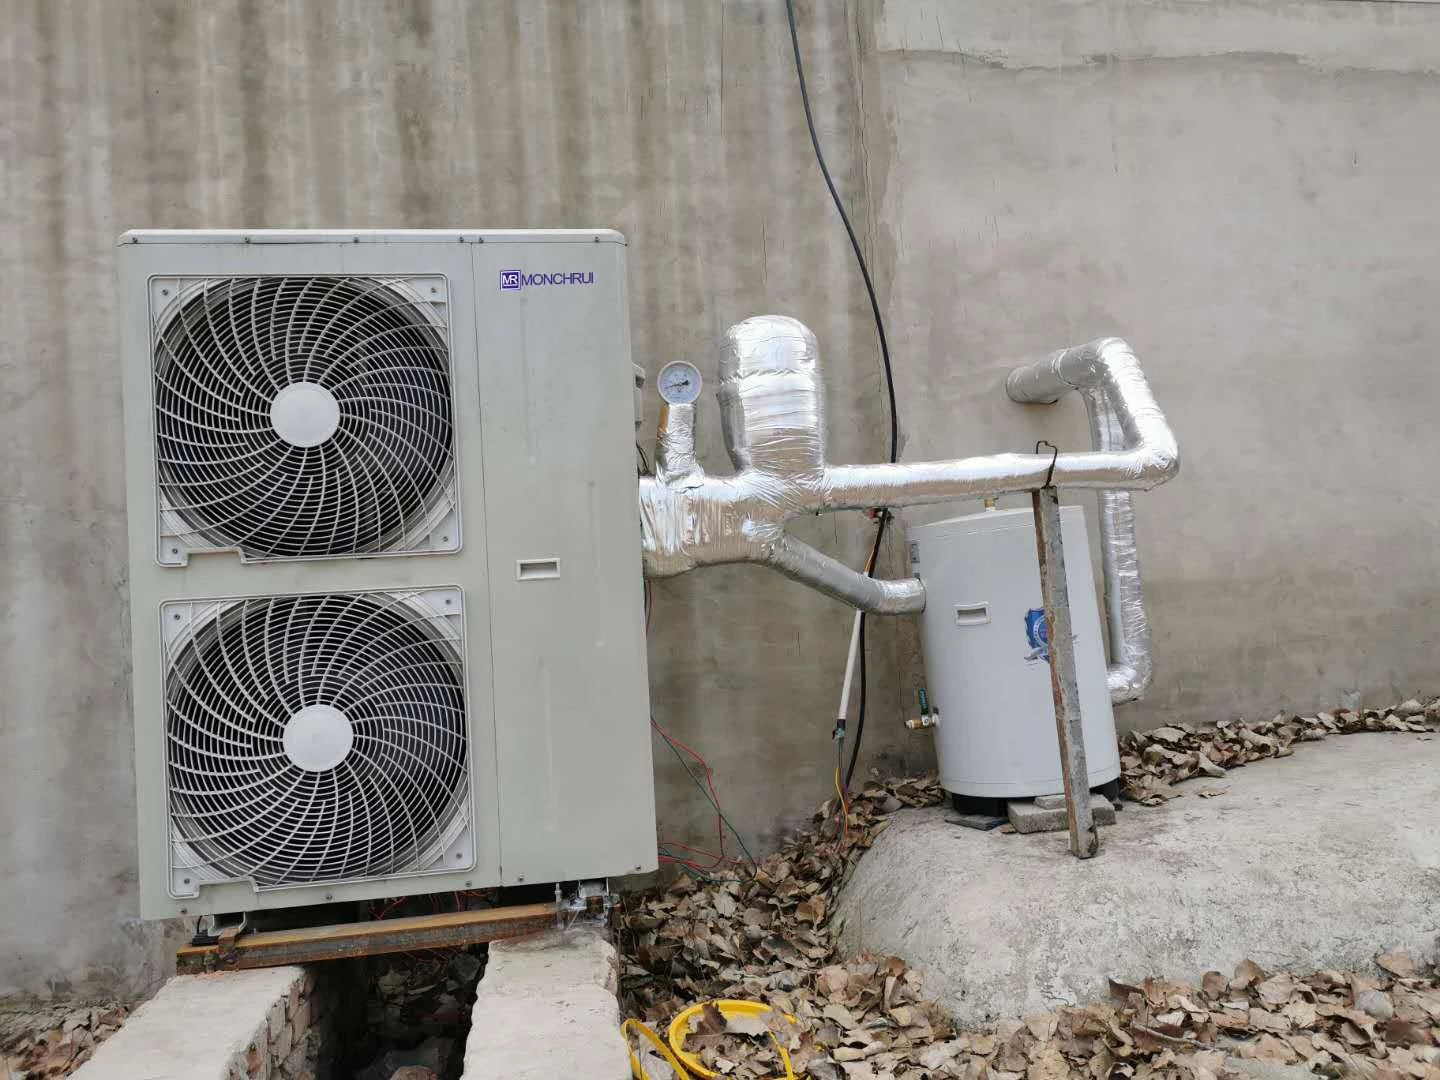 DC inverter air to water heat pump Residential Inverter heat pump air cooled heat pump